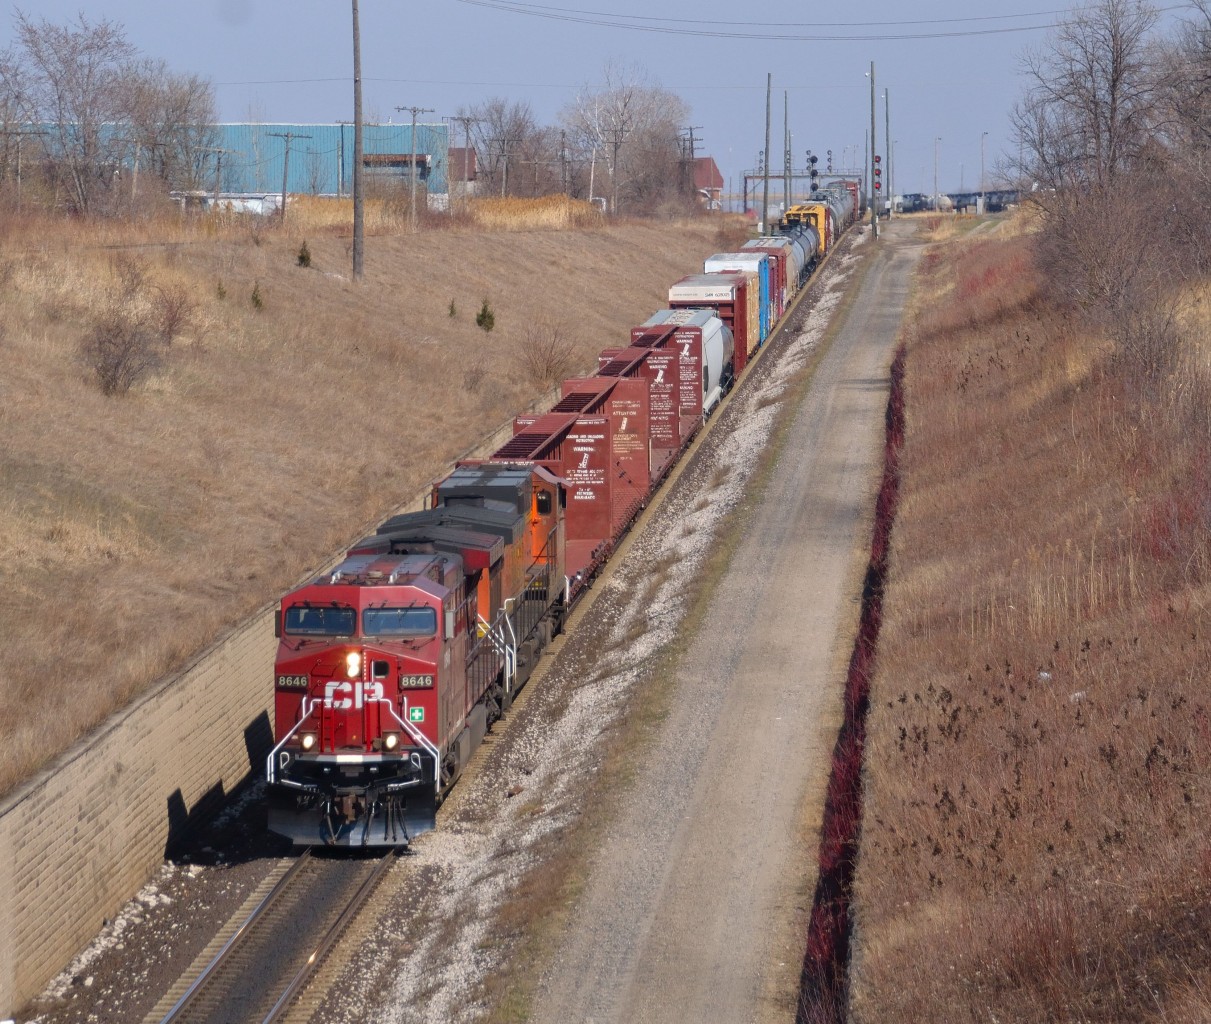 CN 501 makes its decent down the grade towards the tunnel to Port Huron MI led by CP 8646 & BNSF 4723